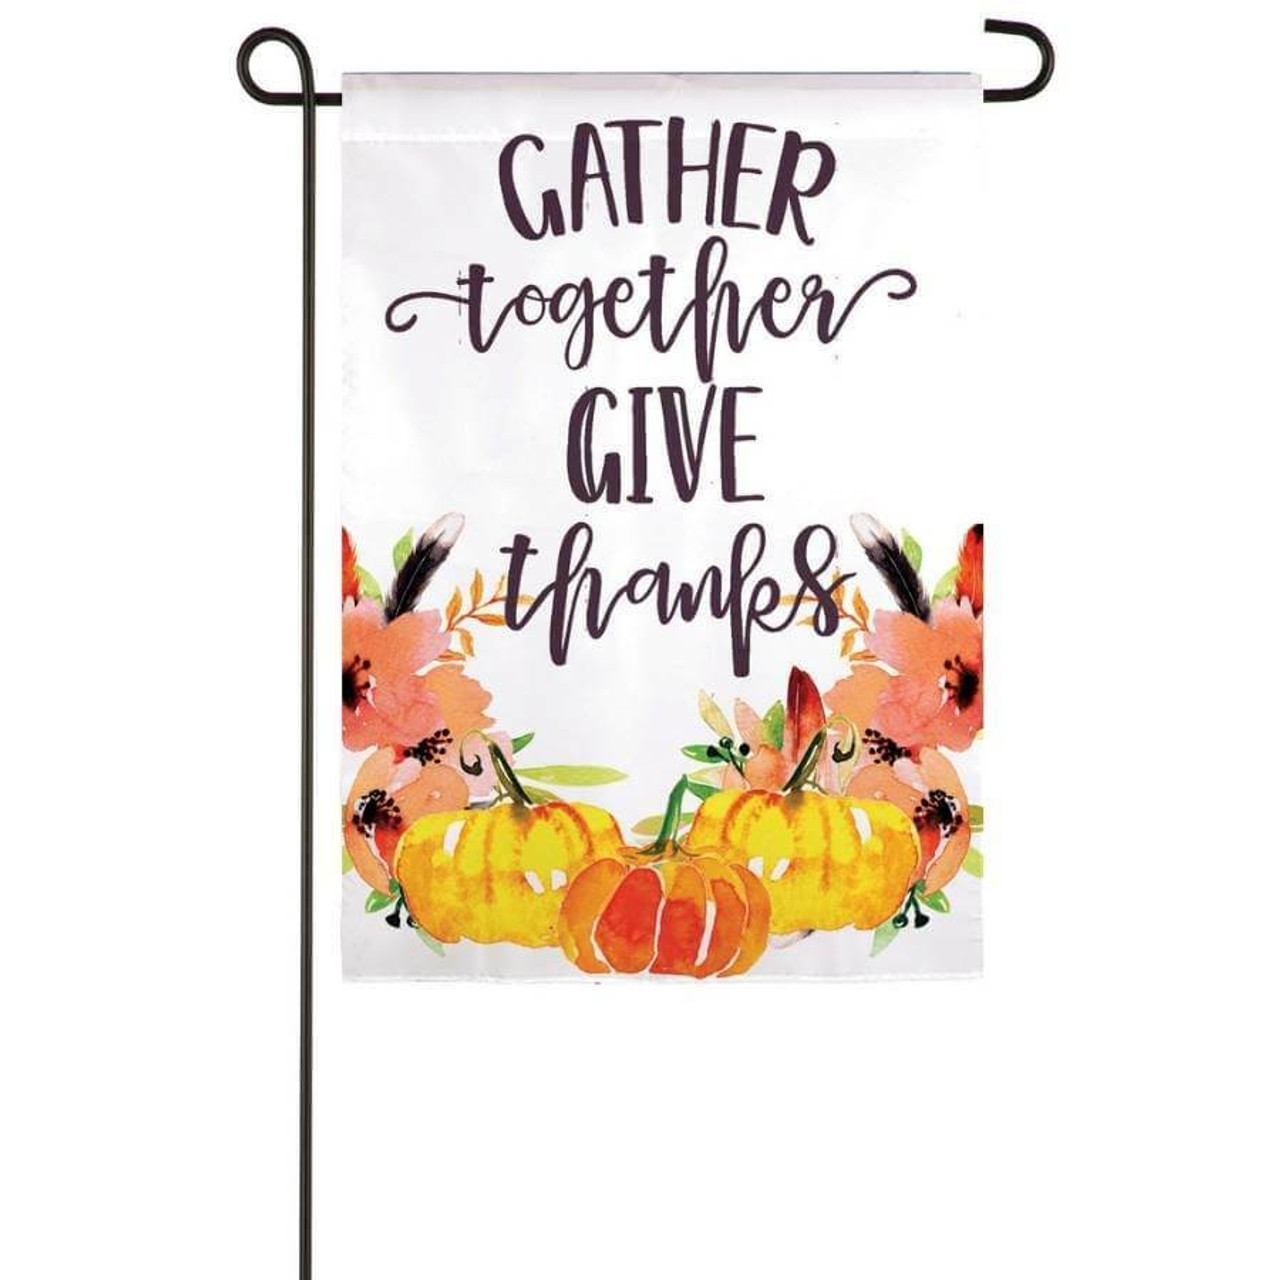 A white flag with the words "GATHER together GIVE thanks" in dark red letters. At the bottom of the flag, there are yellow and red pumpkins with pink flowers.